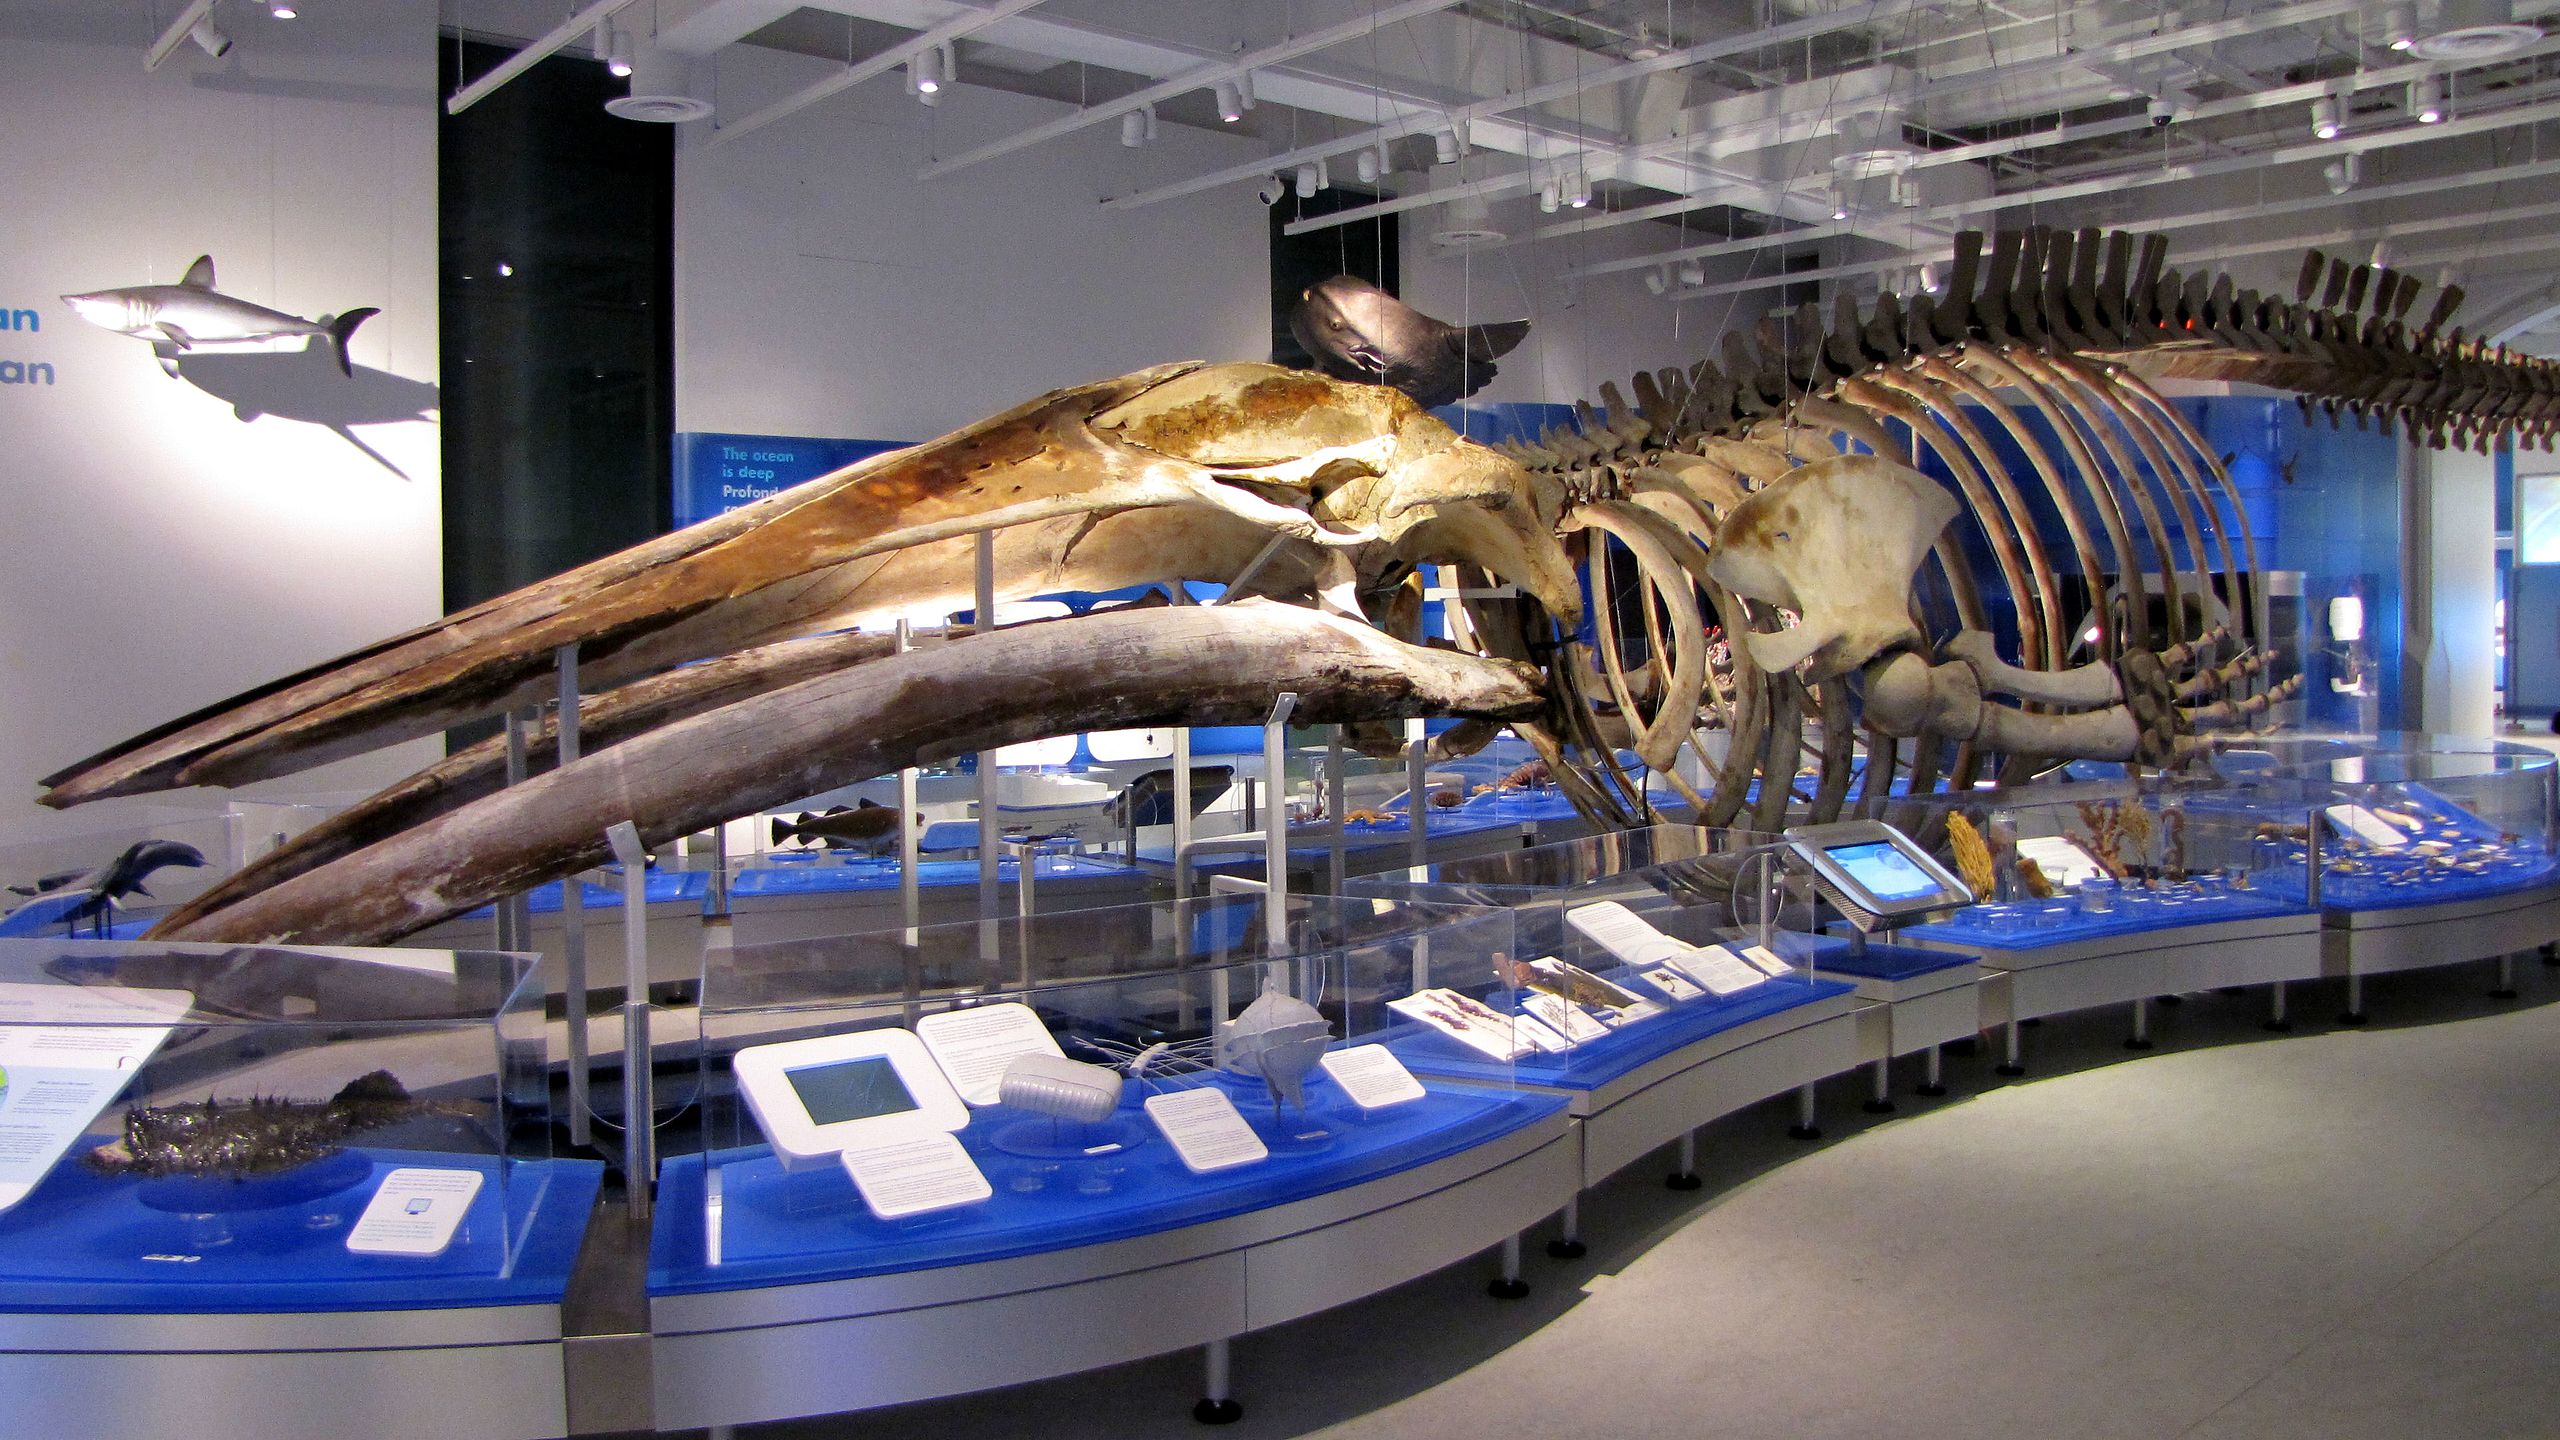 2560px-Blue_Whale_skeleton%2C_Canadian_Museum_of_Nature.jpg